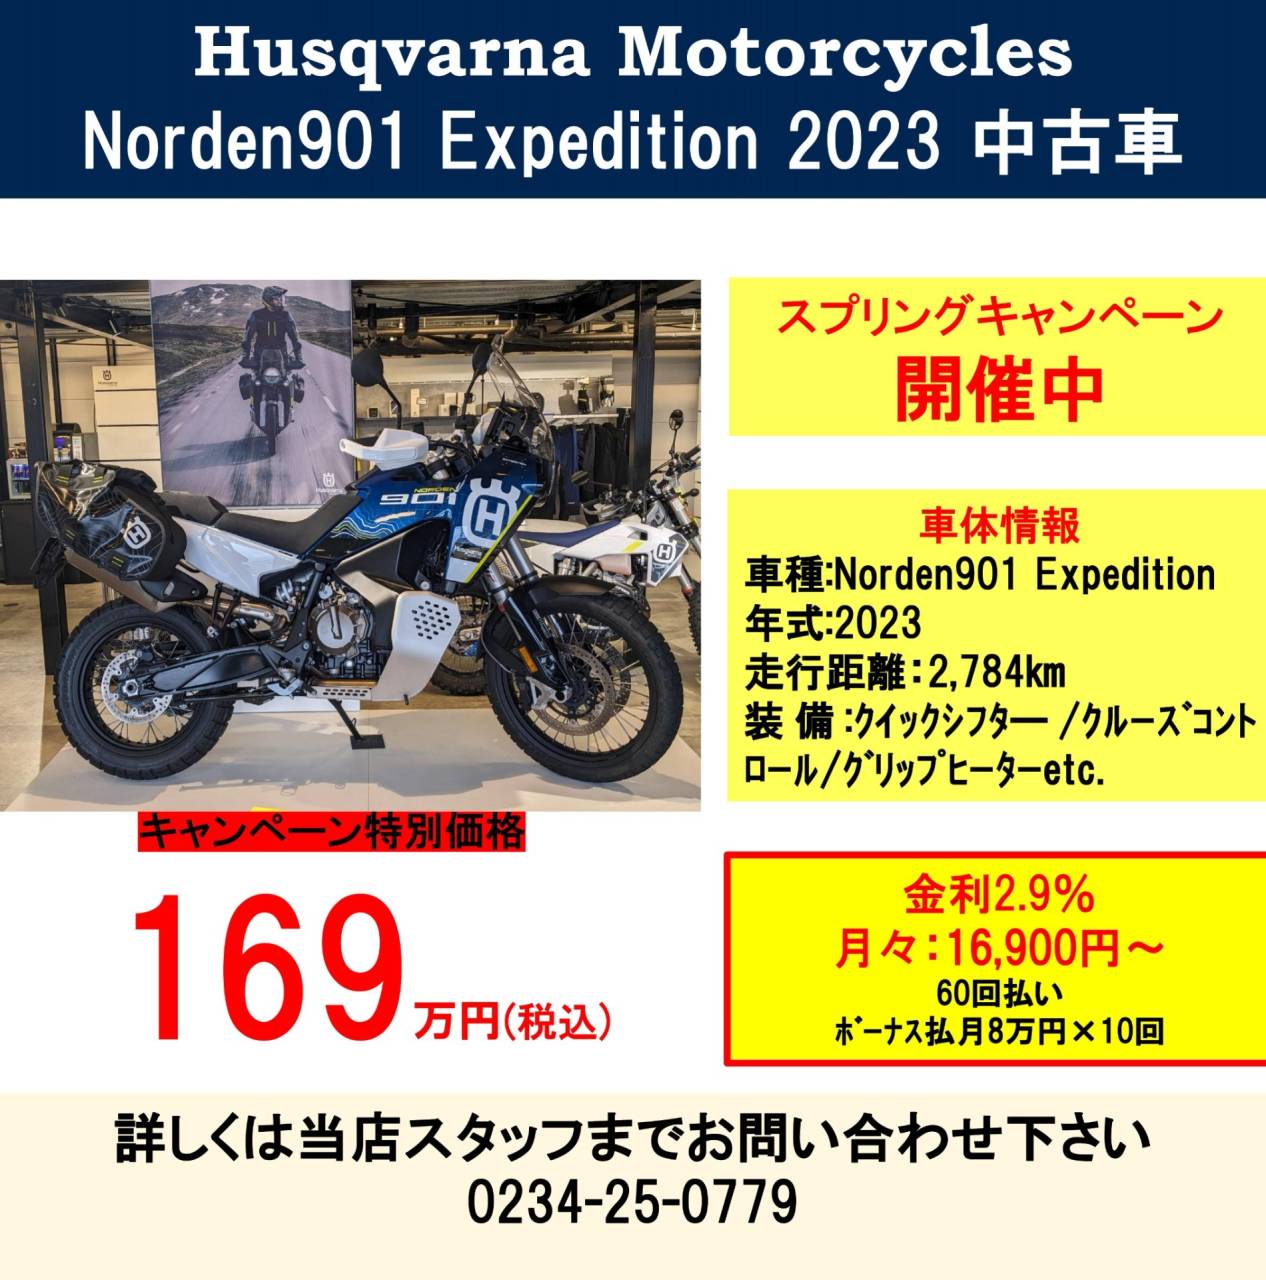 Norden901 Expedition 認定中古車 ハスクバーナ山形